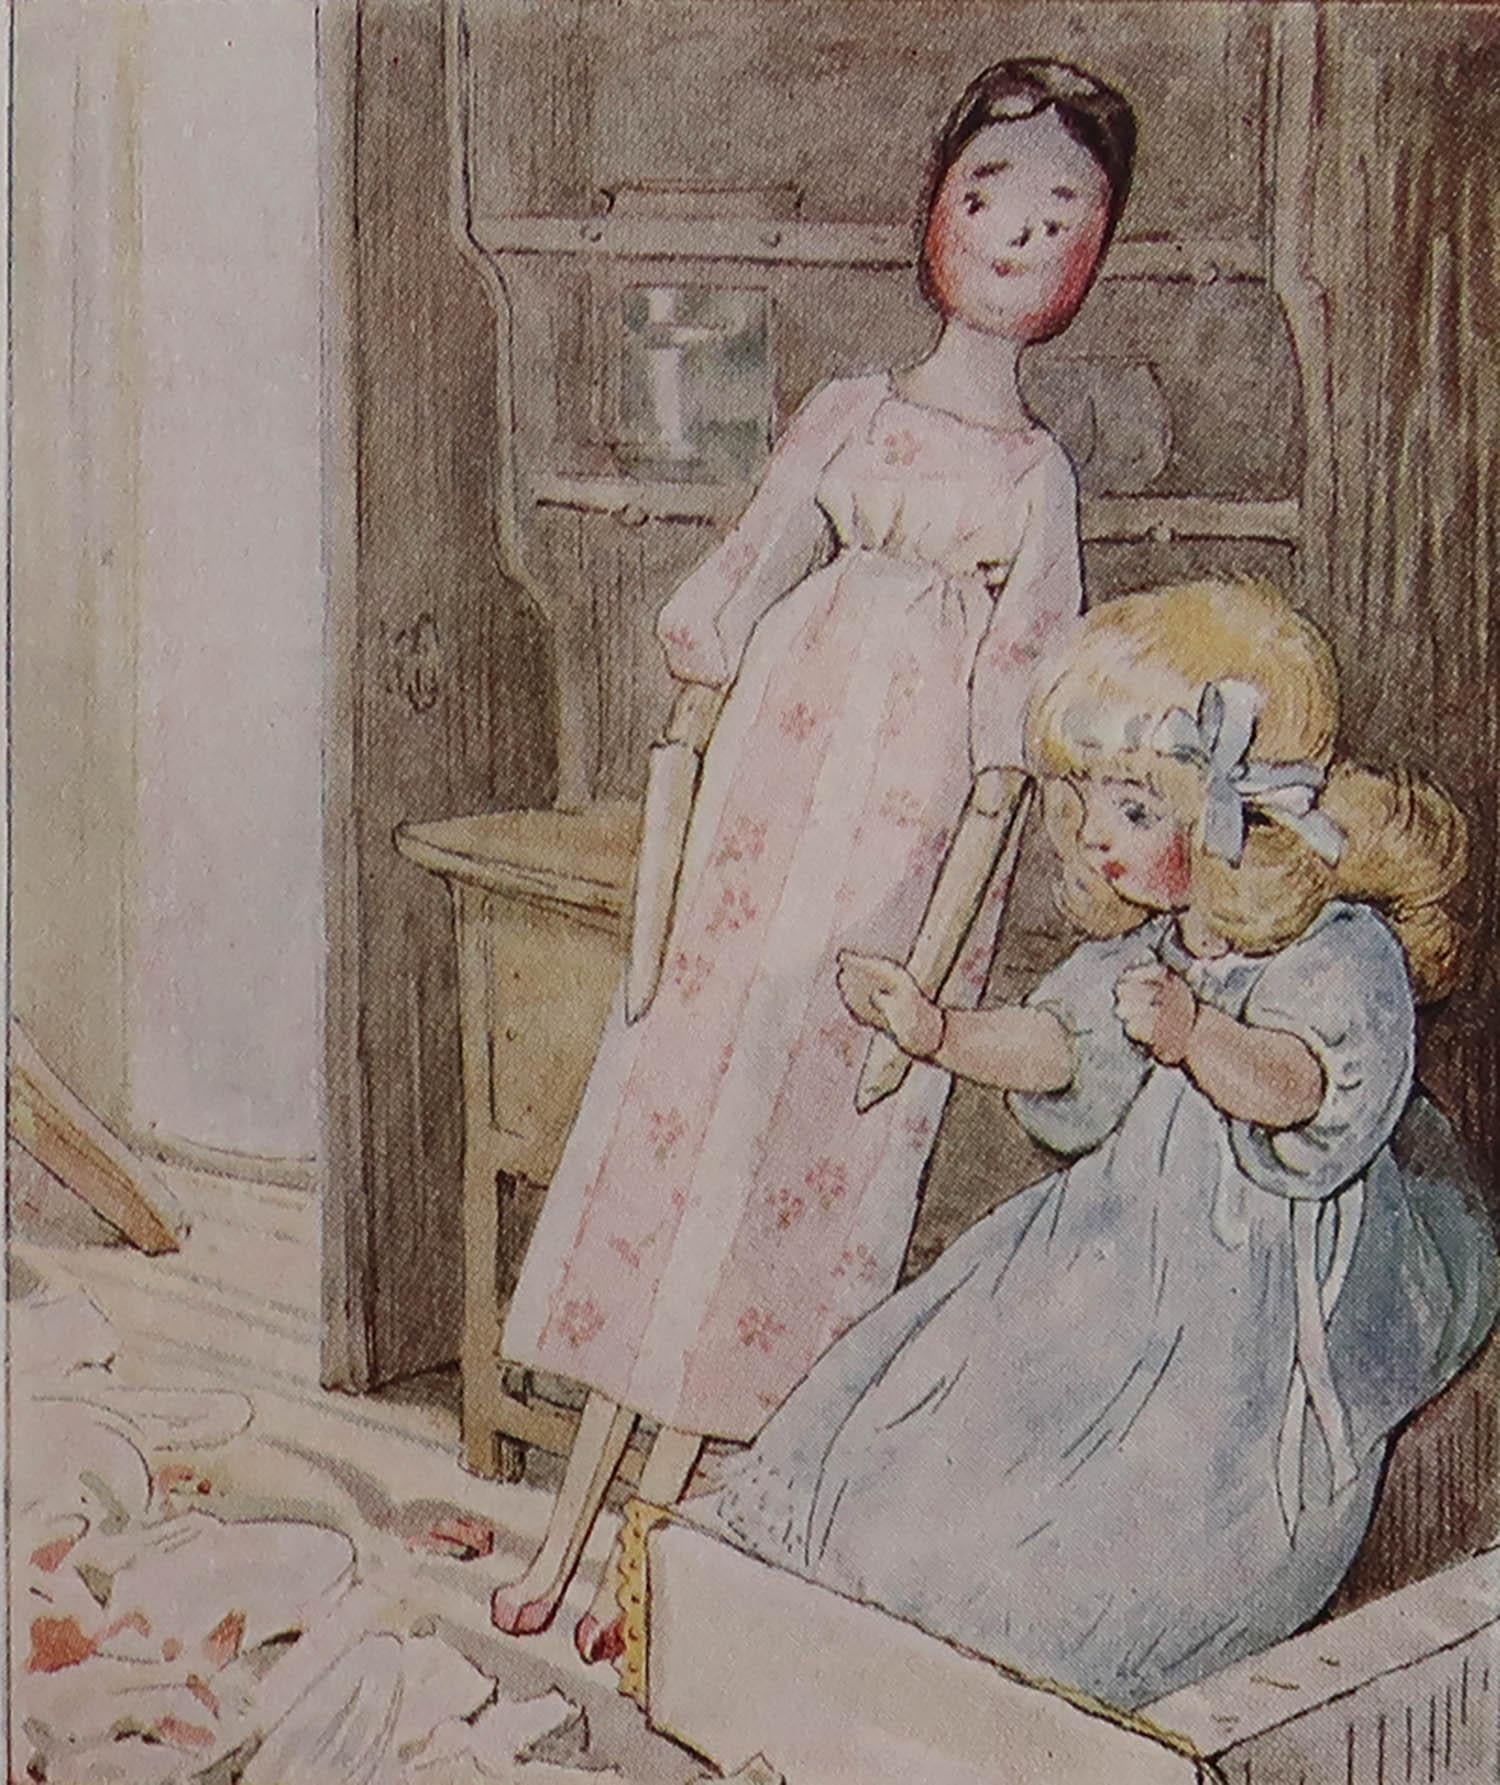 Lovely image by Beatrix Potter

Rescued from an early edition of 